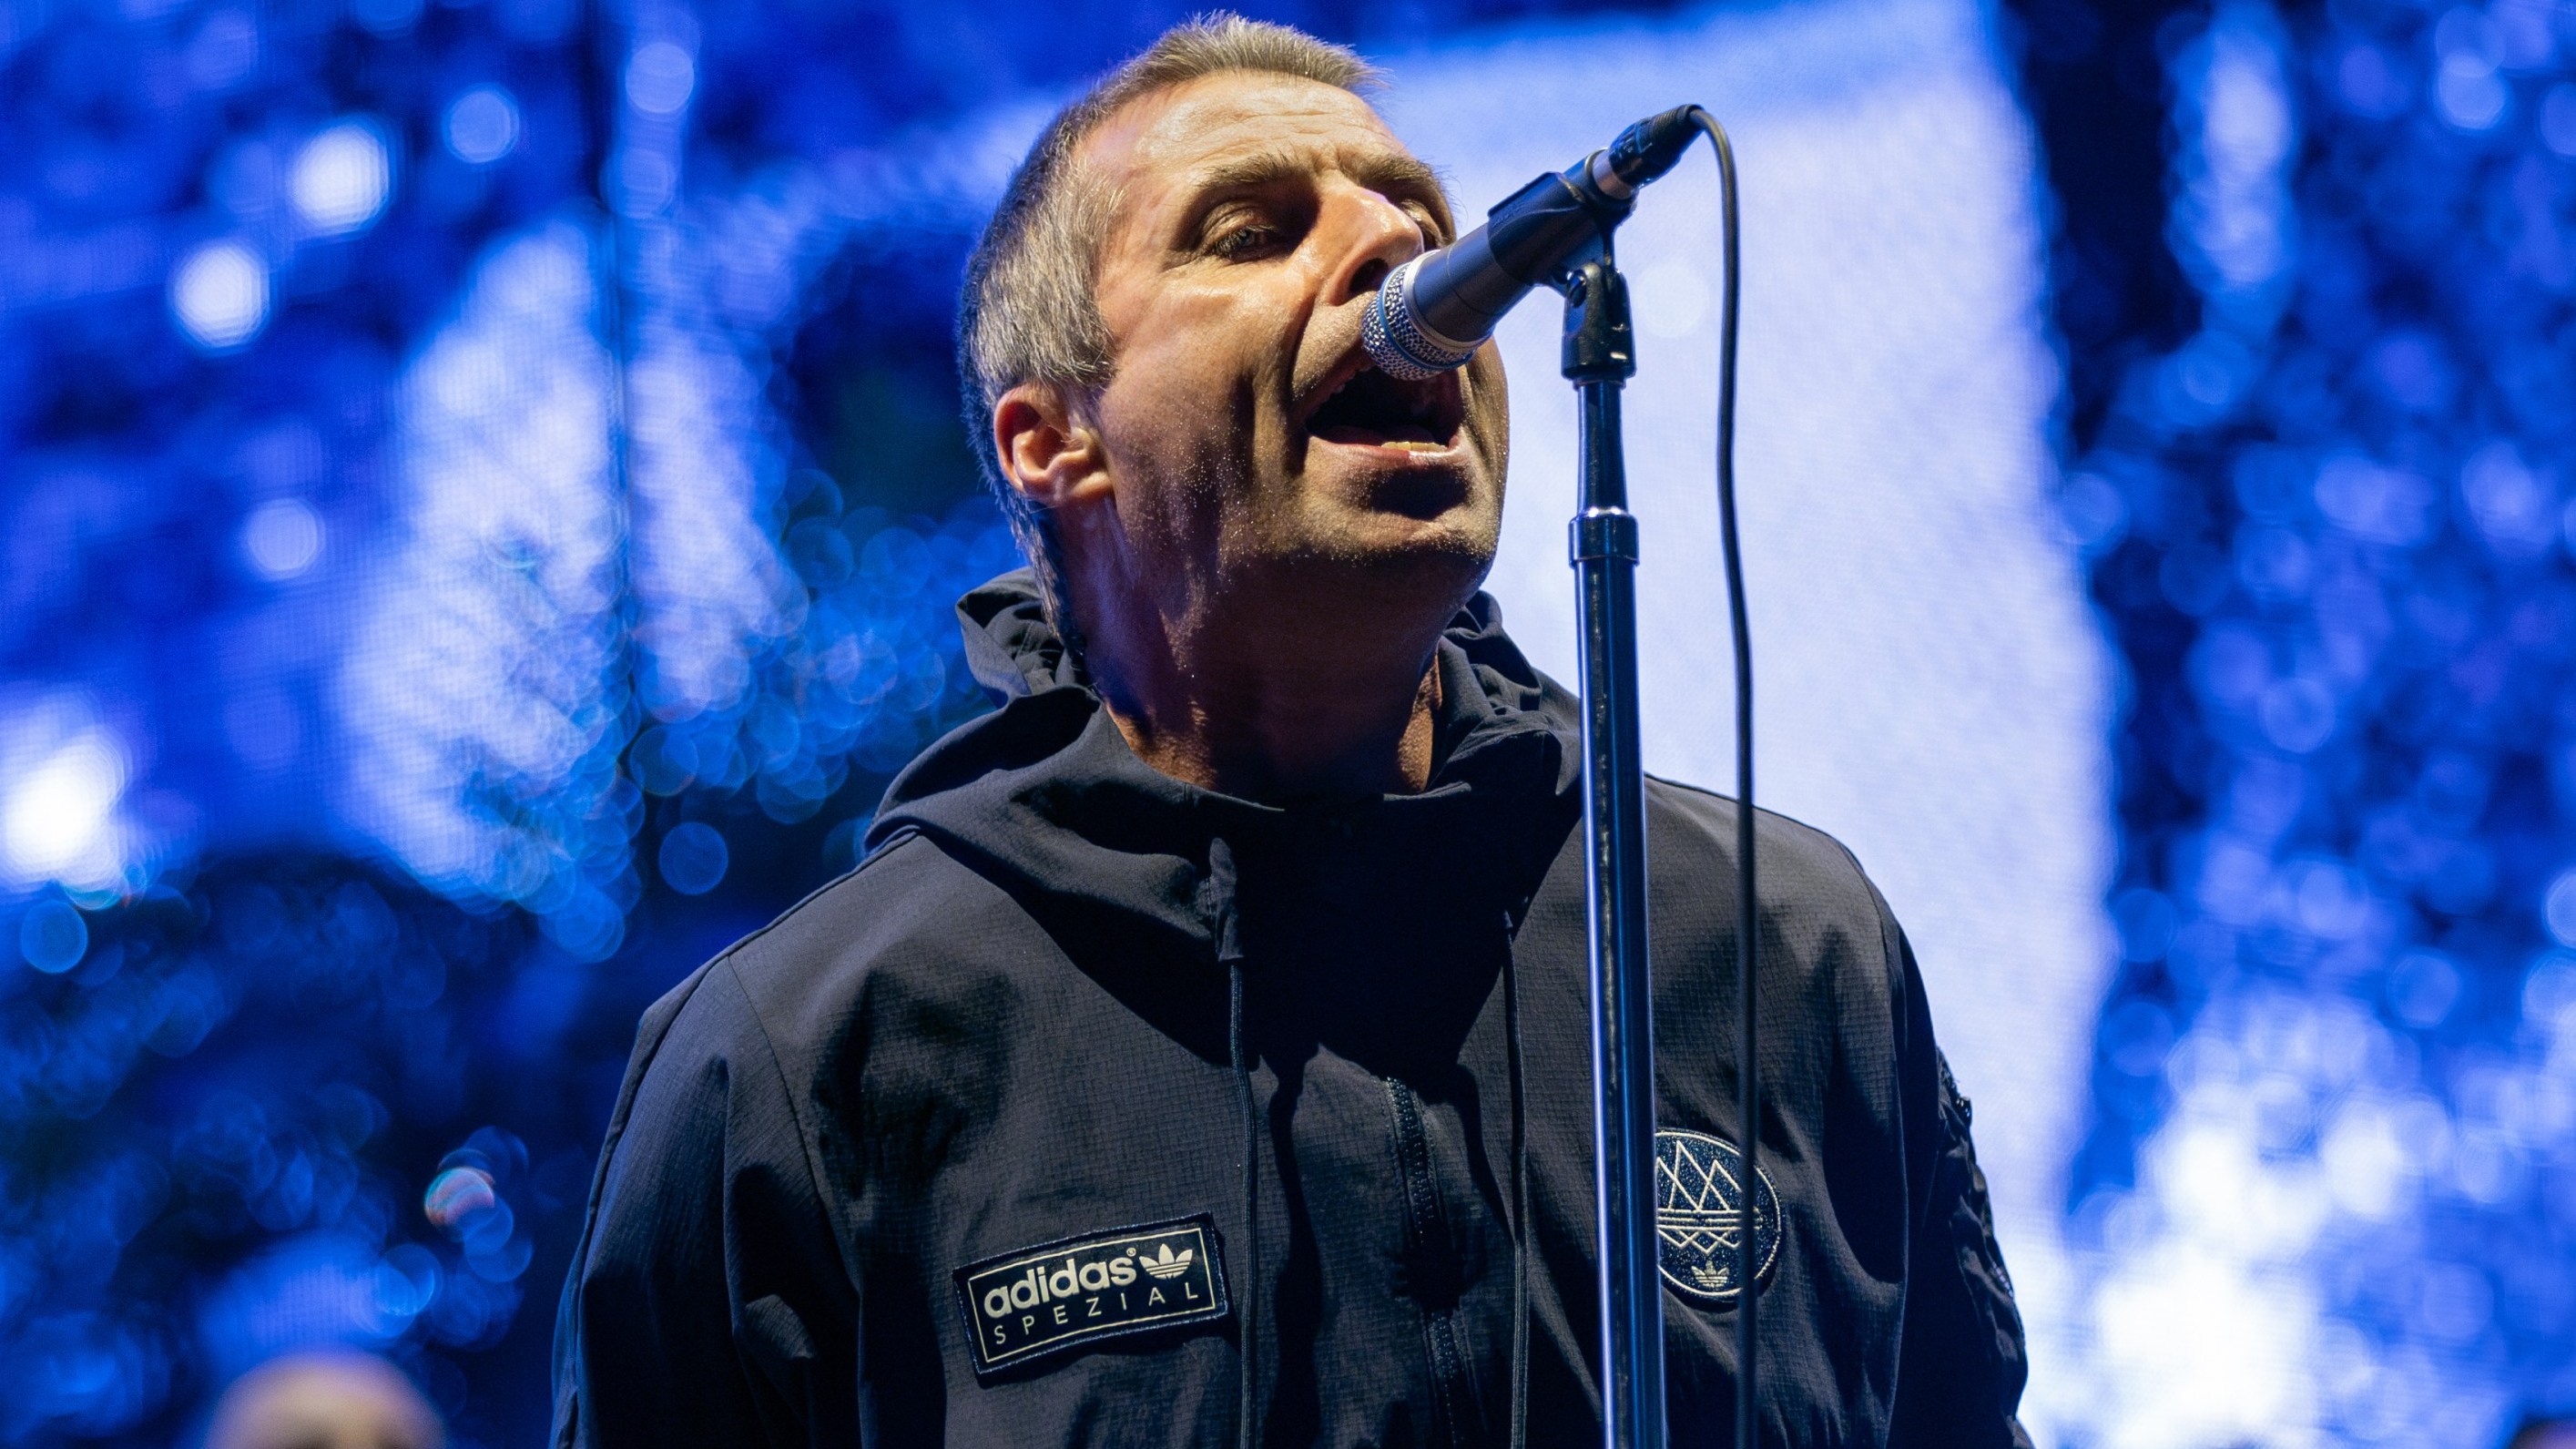 Liam Gallagher turned the clock back to the mid-Nineties at the O2